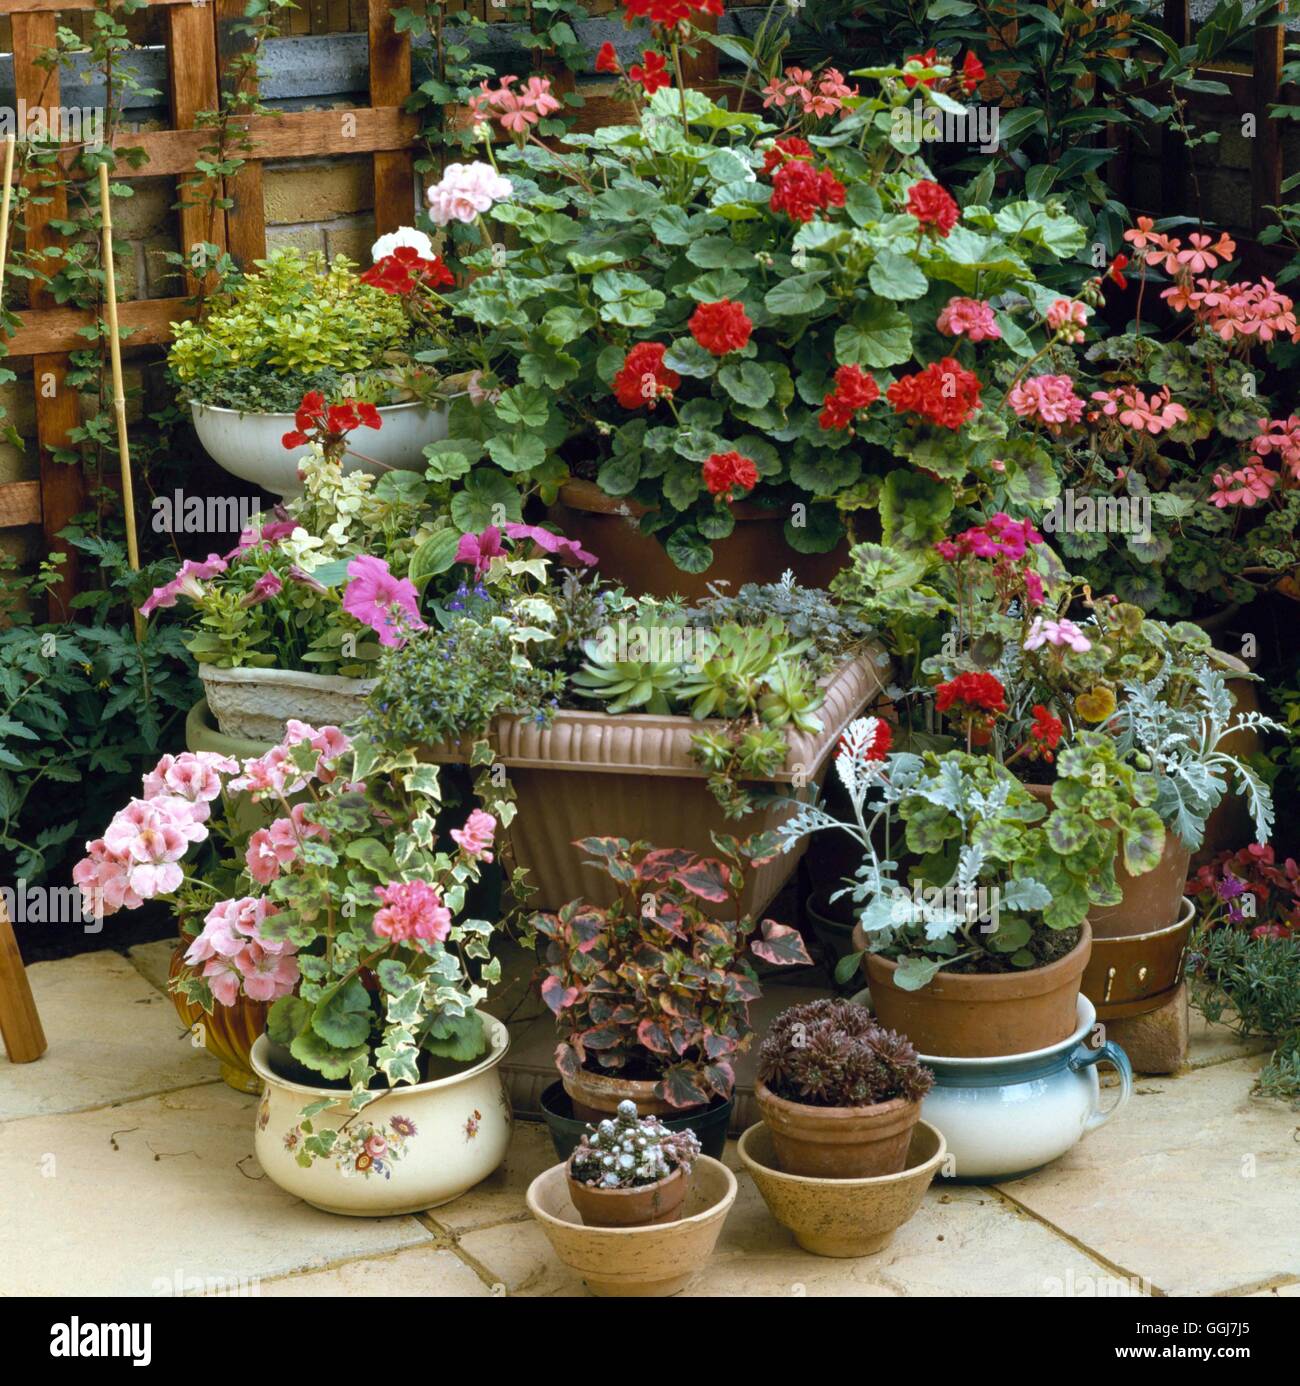 Containers - Annual - Plants in a variety of containers for ease of watering   CTR022702     Photos Stock Photo